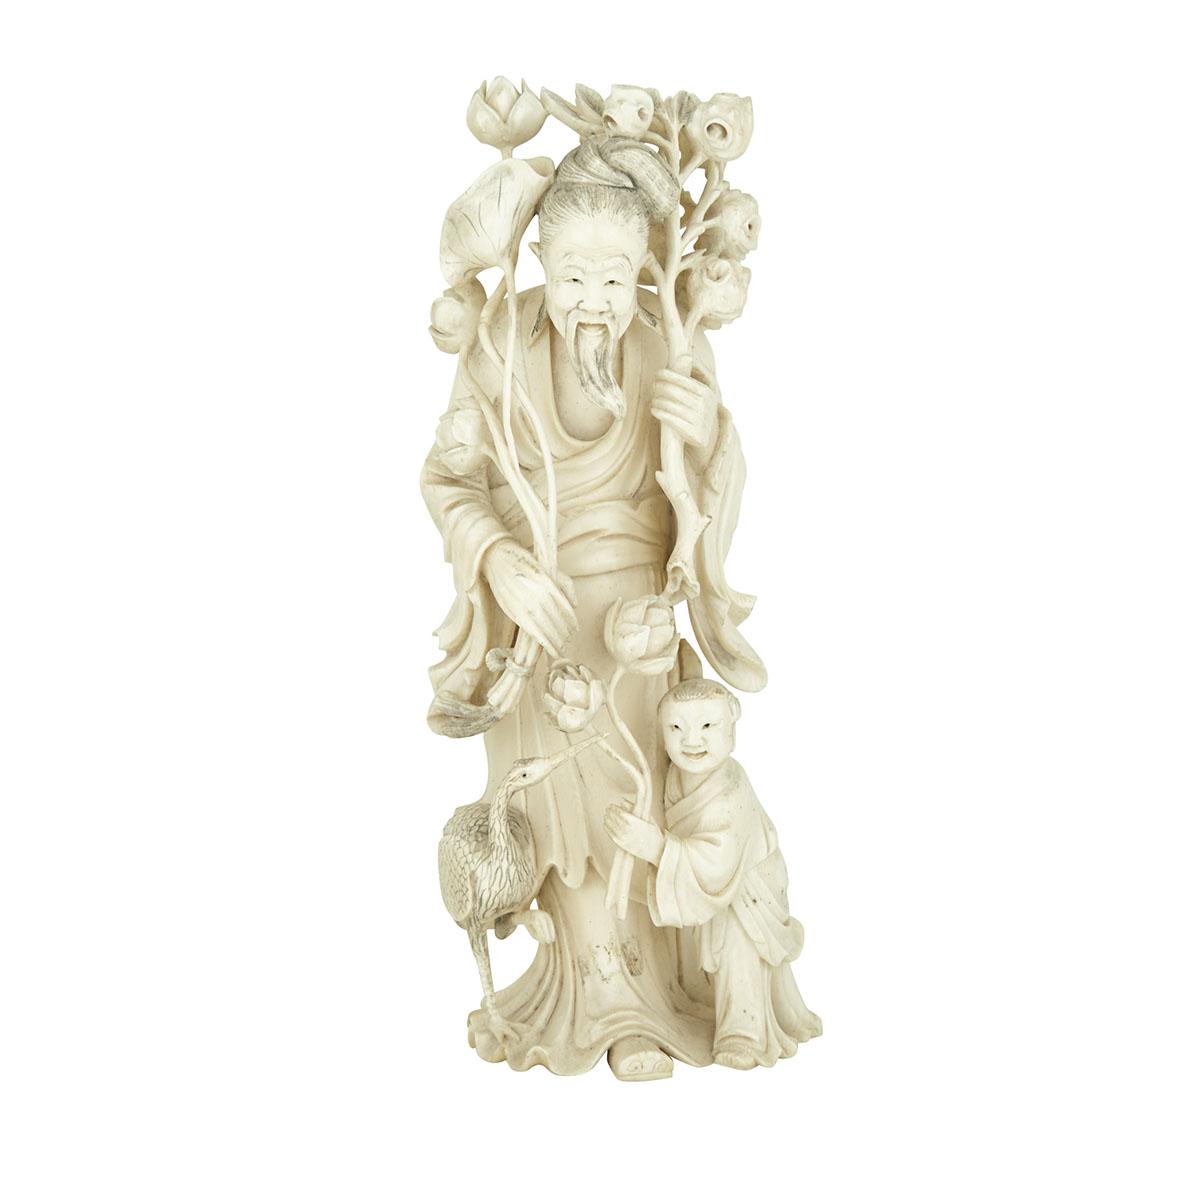 Carved Ivory Chinese Figure with Lotus Blossoms, Circa 1920